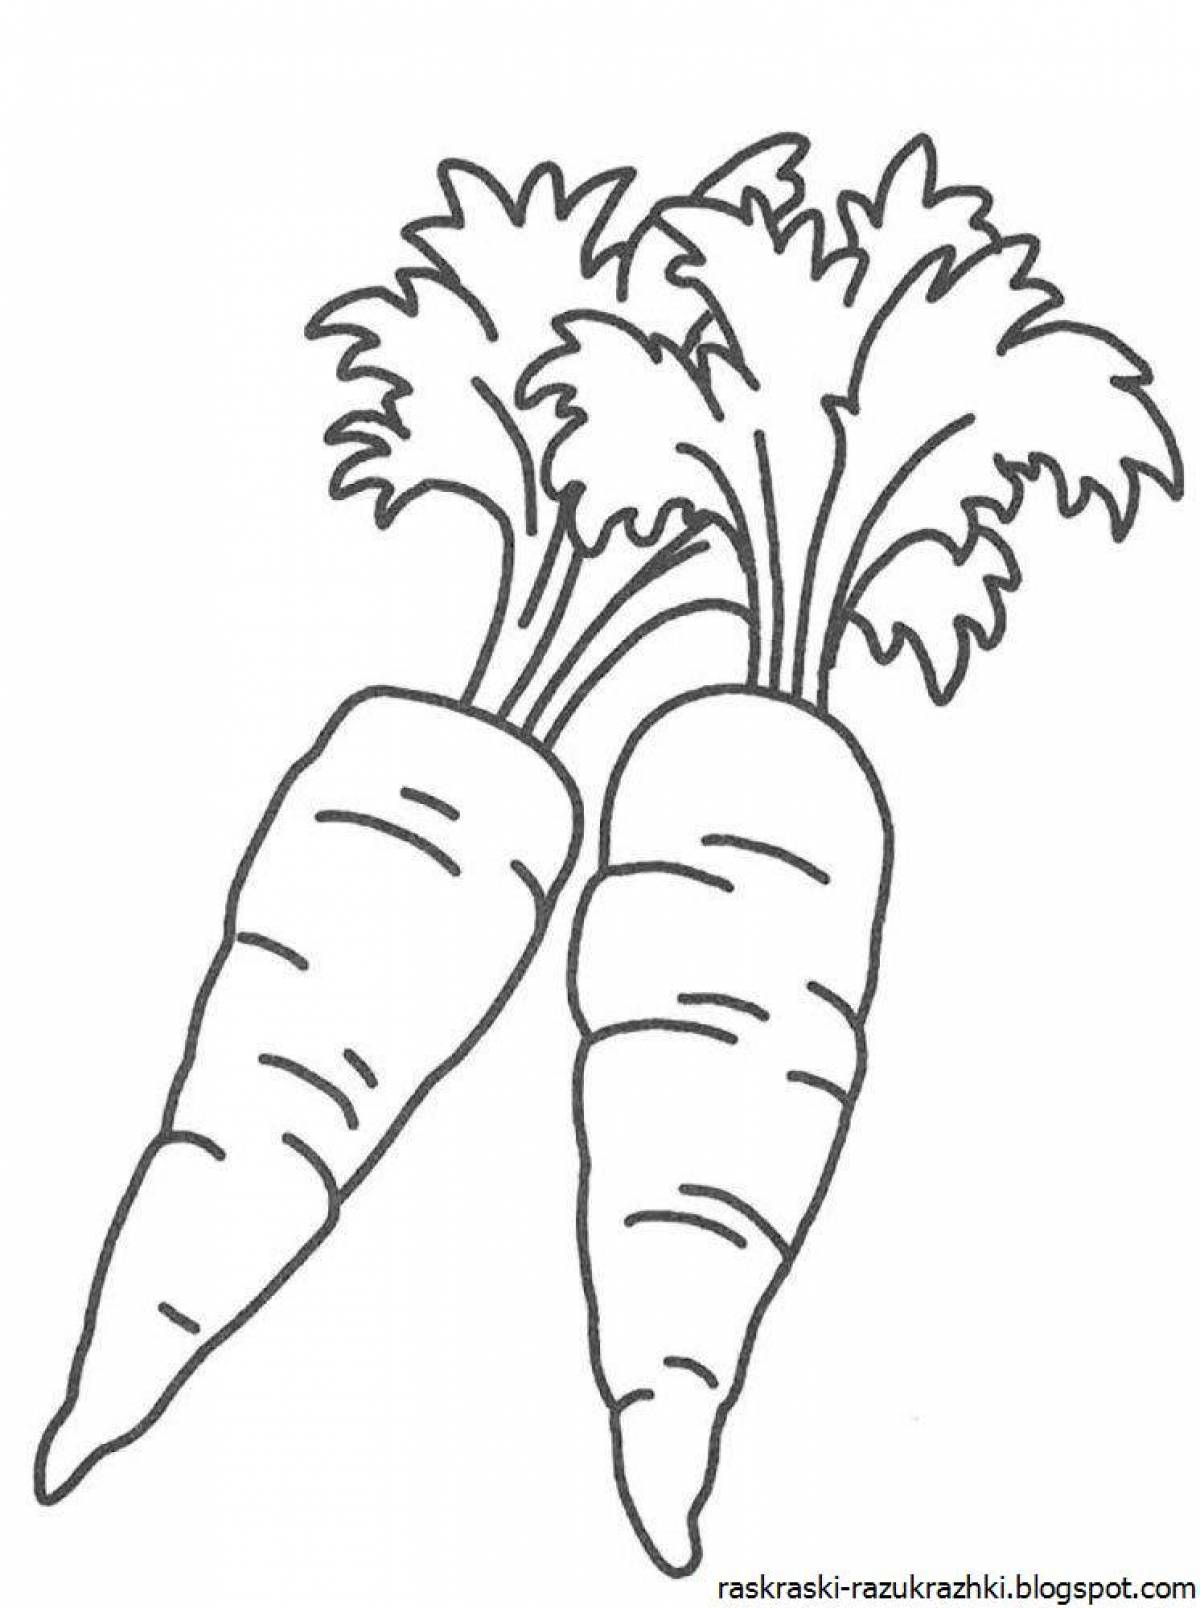 Bright carrot coloring book